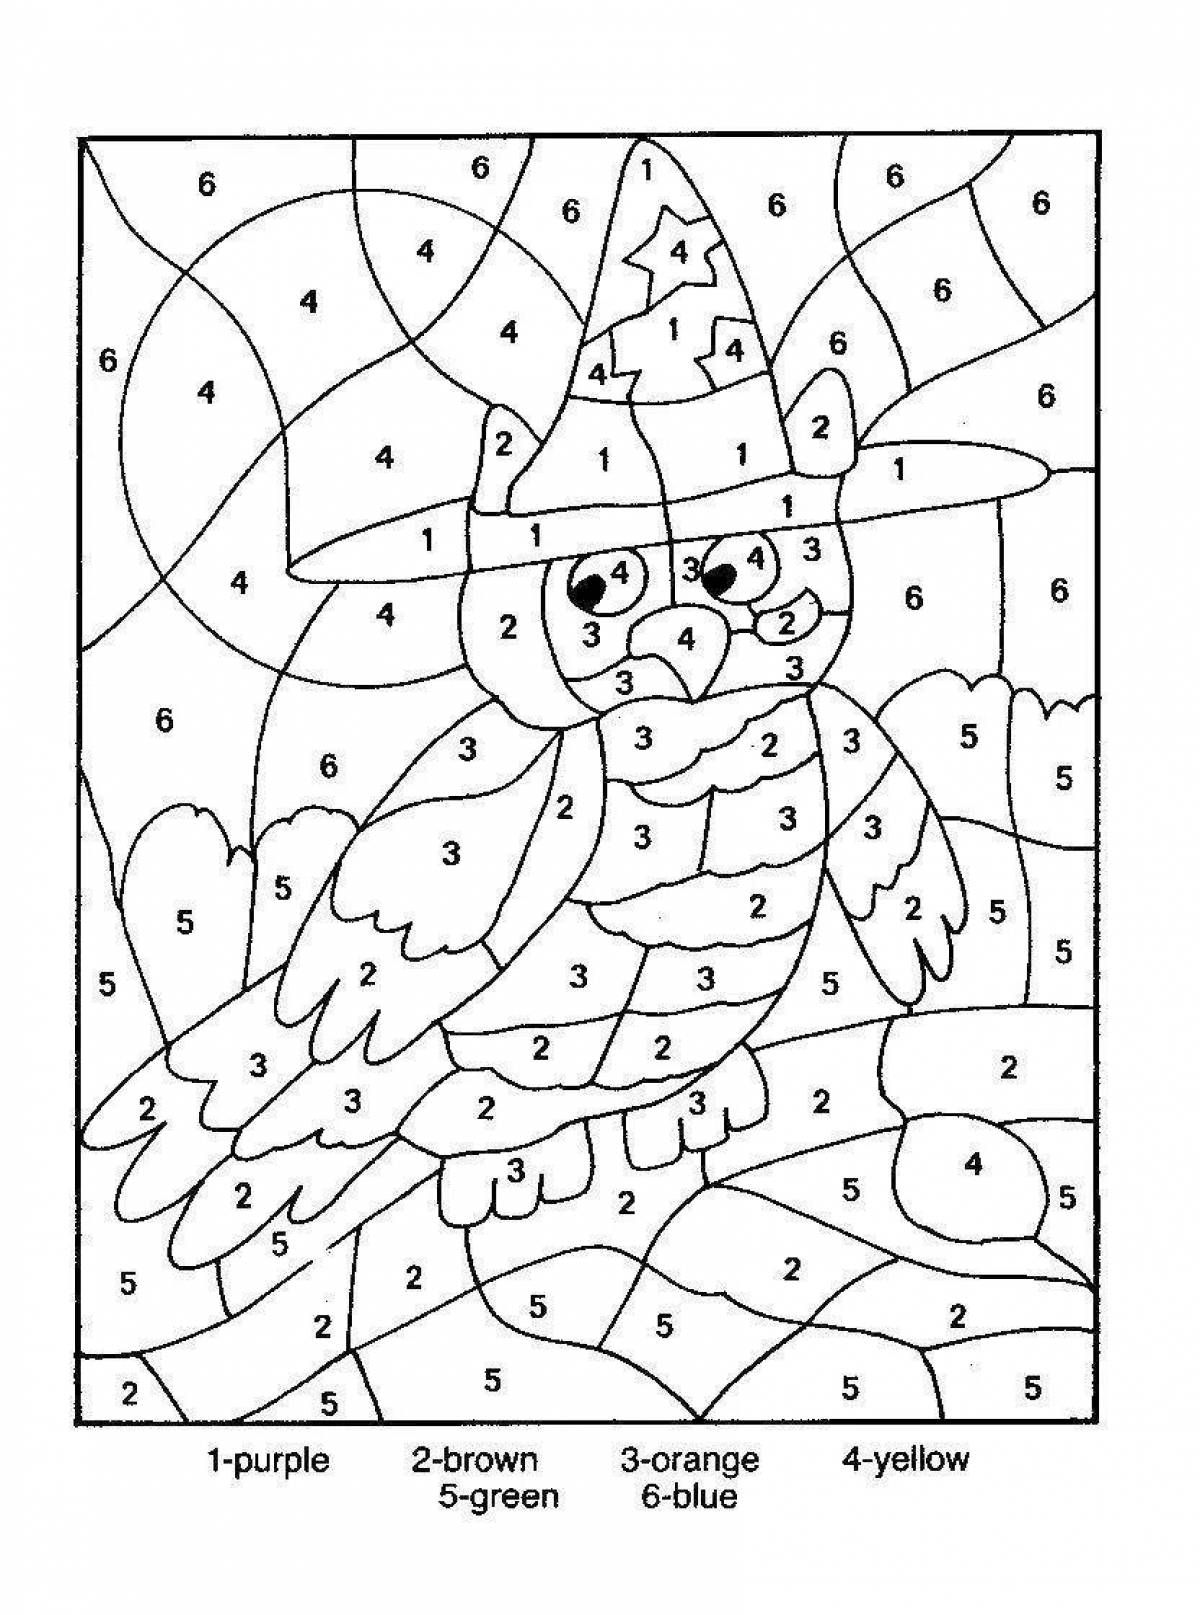 Humorous coloring book color